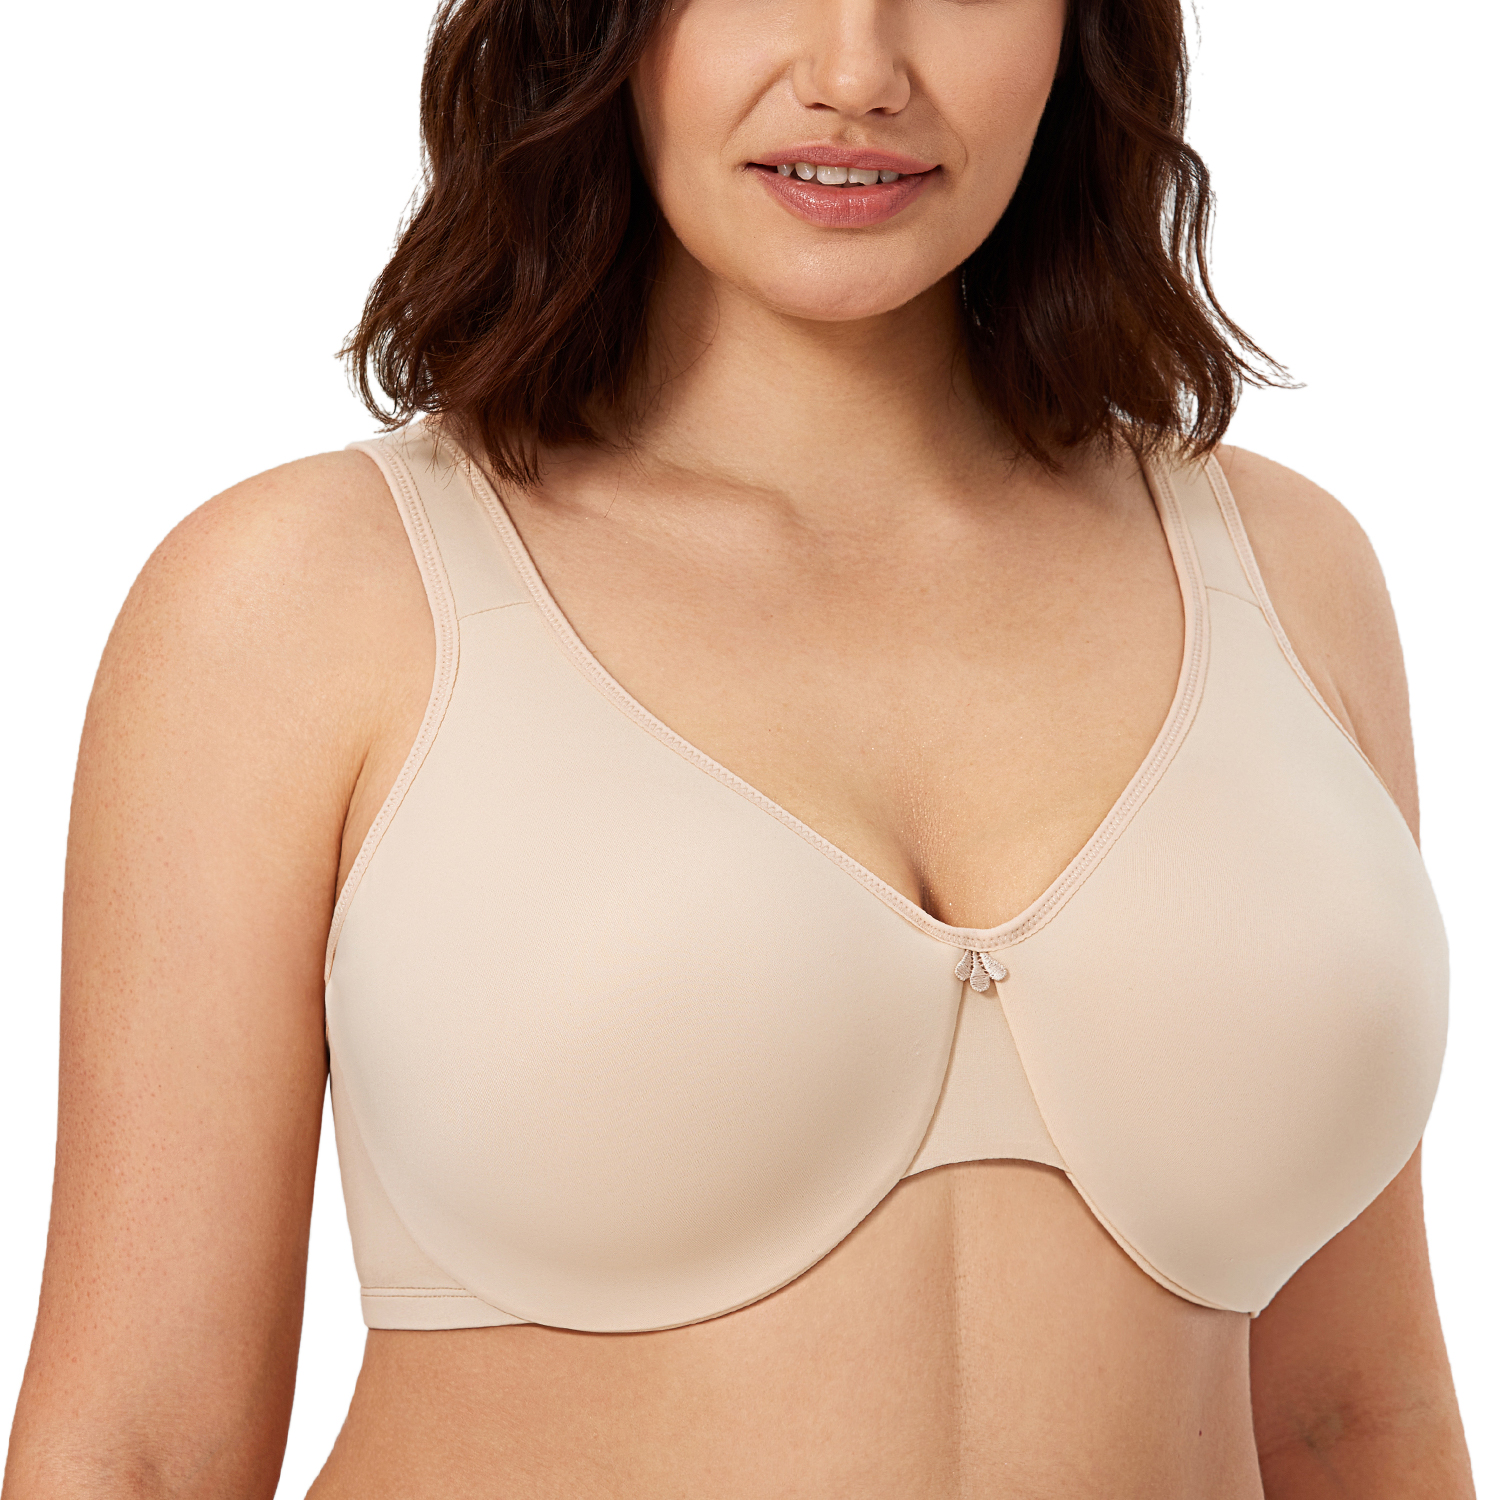 Women's Plus Size Bras Minimizer Underwire Full Coverage Unlined Seamless  Cup Lifting Lace Bra for Heavy Breast Minimizer Bras for Women Full